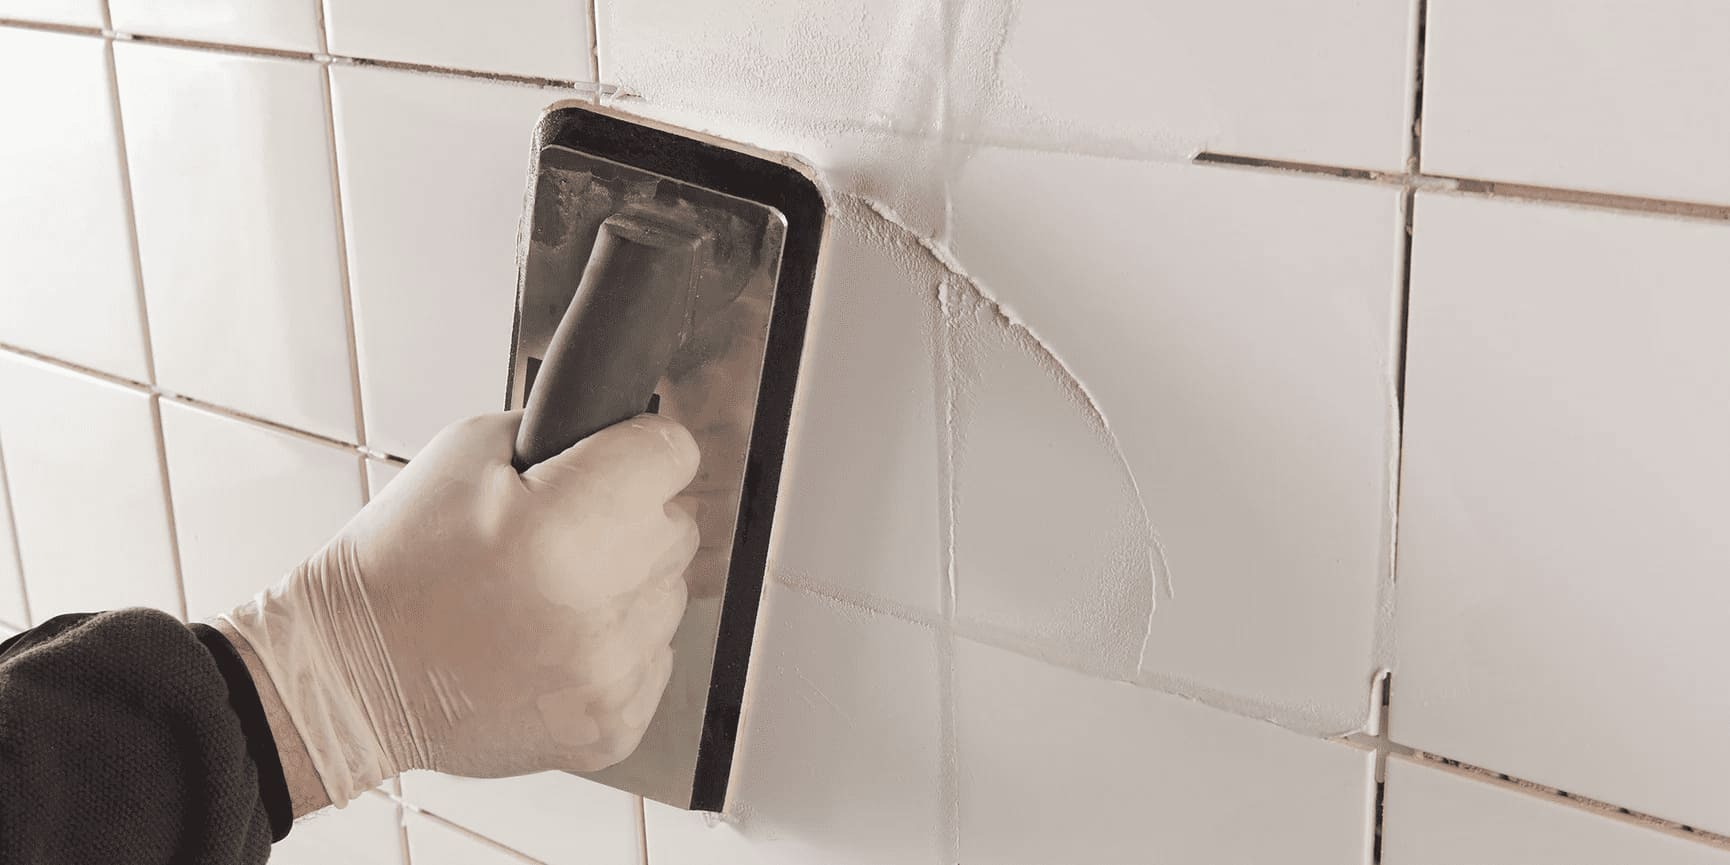 A grout float being used on a tiled wall